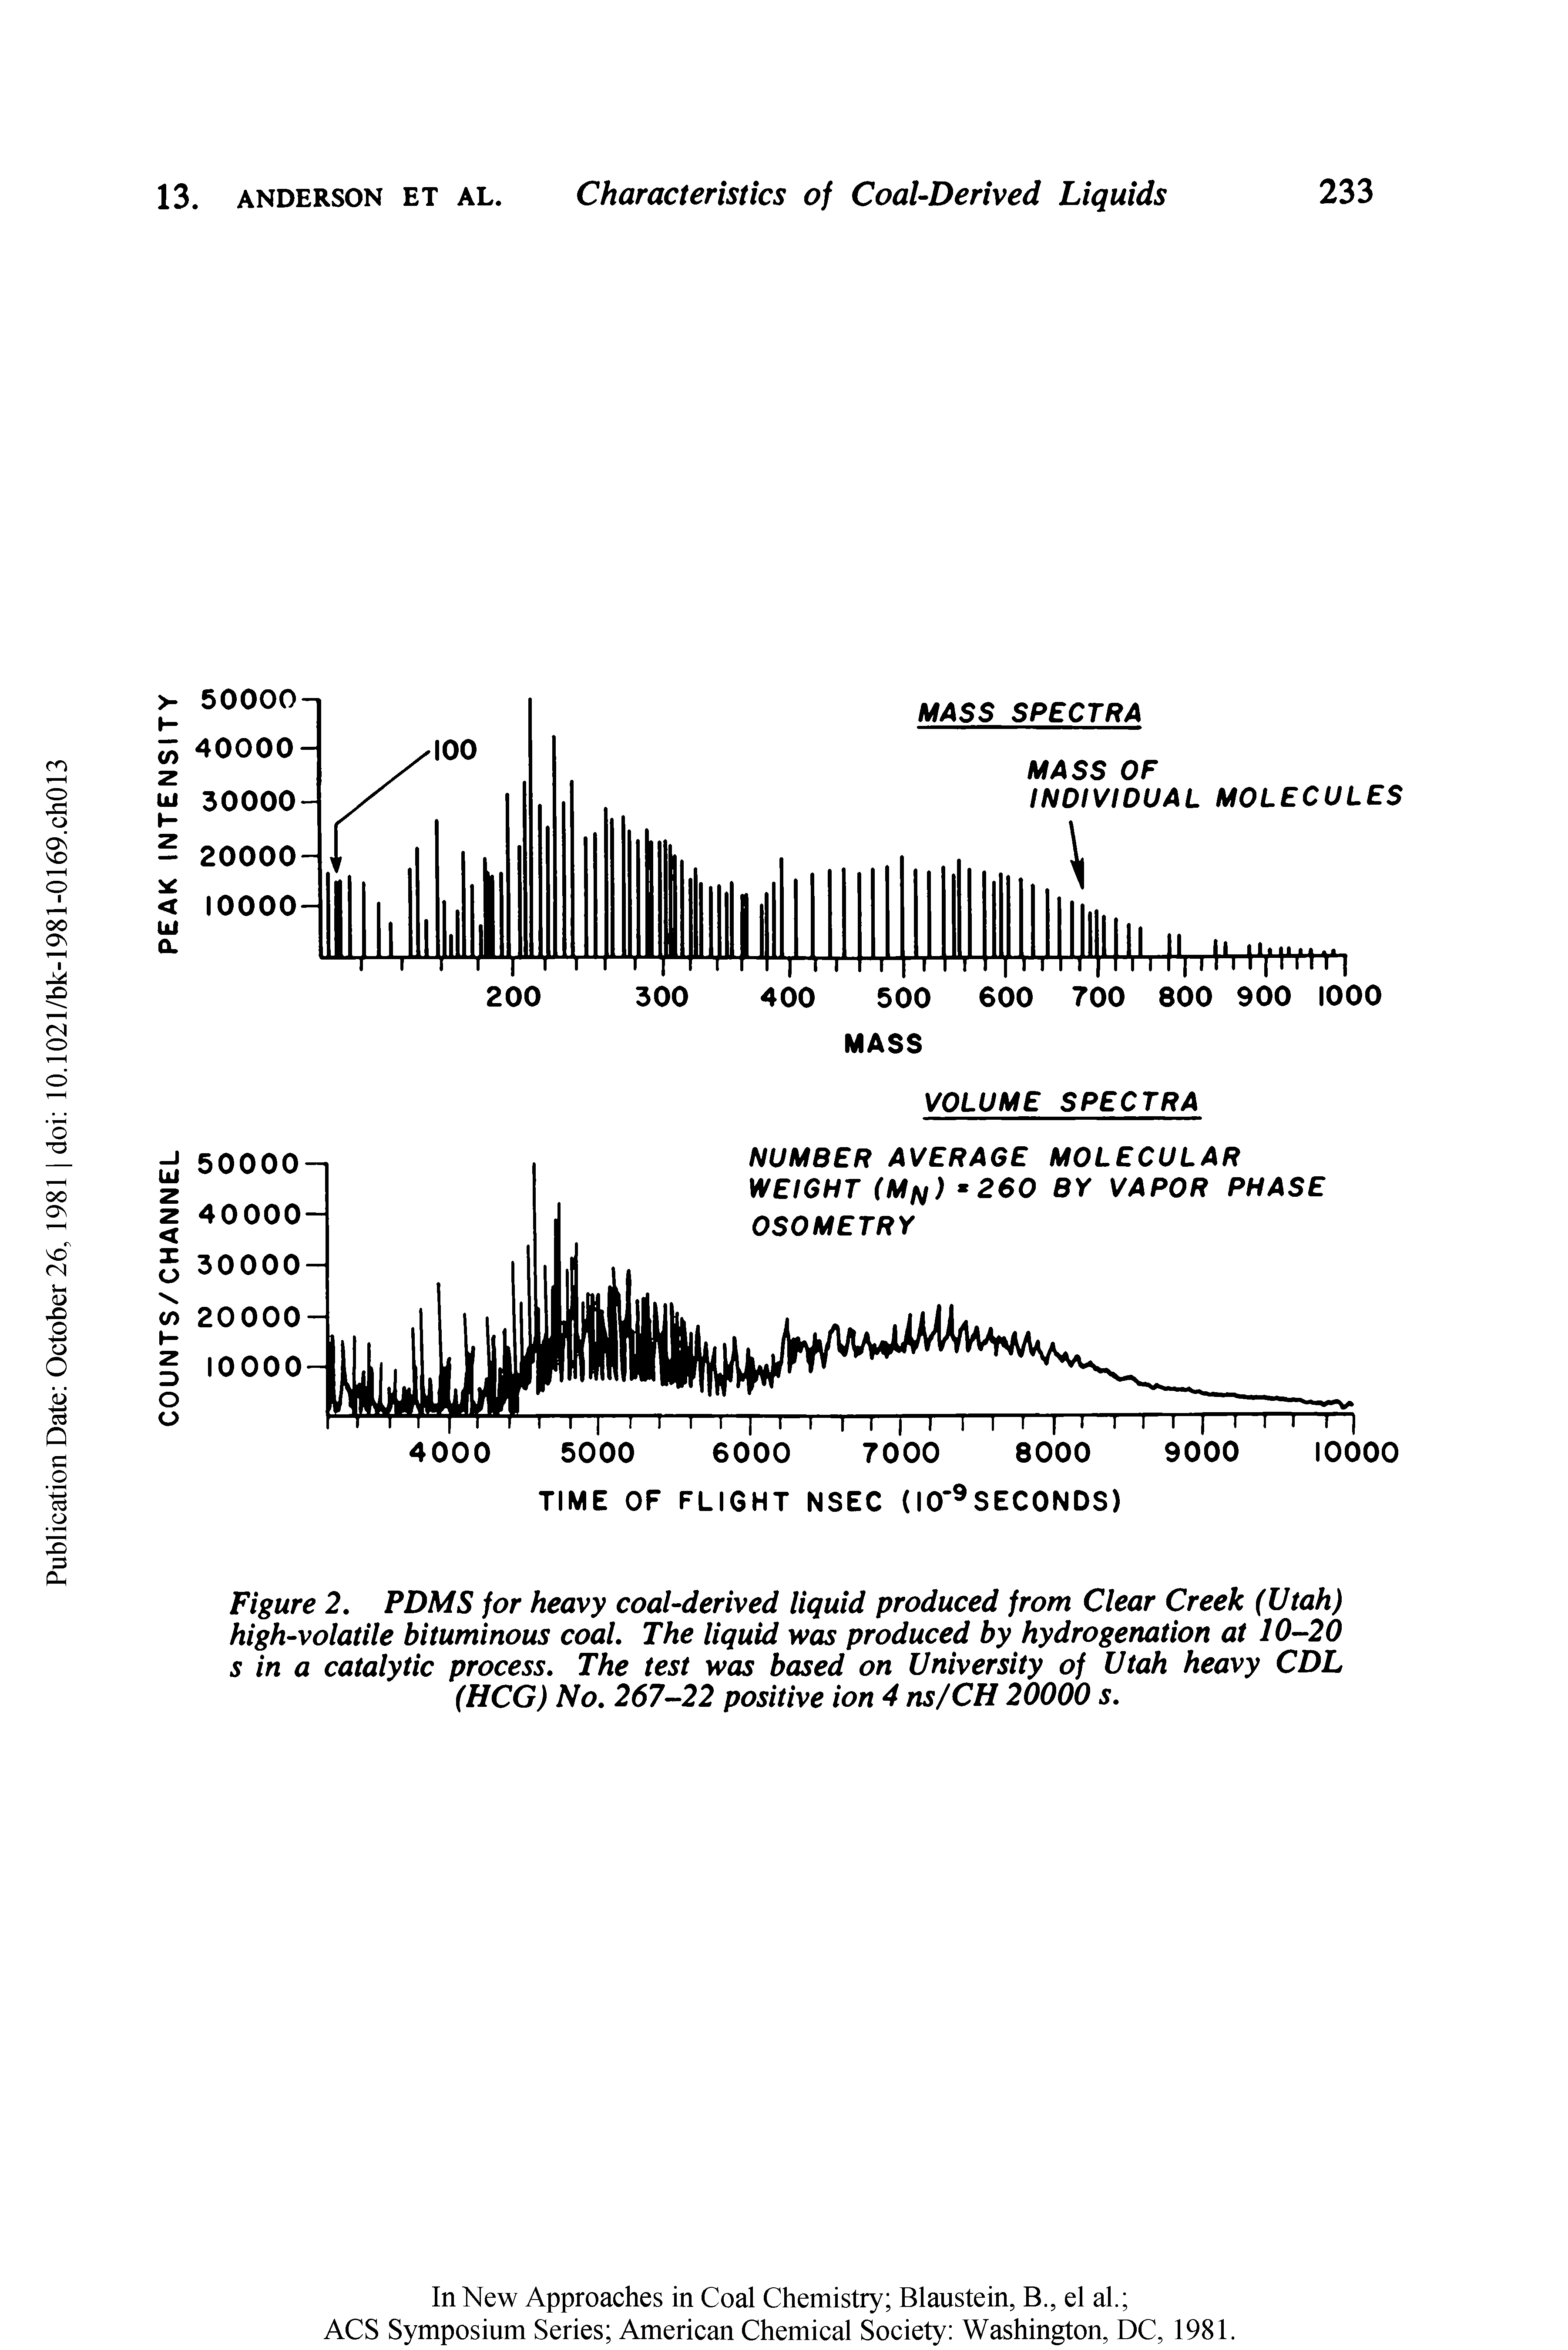 Figure 2. PDMS for heavy coal-derived liquid produced from Clear Creek (Utah) high-volatile bituminous coal. The liquid was produced by hydrogenation at 10-20 s in a catalytic process. The test was based on University of Utah heavy CDL (HCG) No. 267-22 positive ion 4 ns/CH 20000 s.